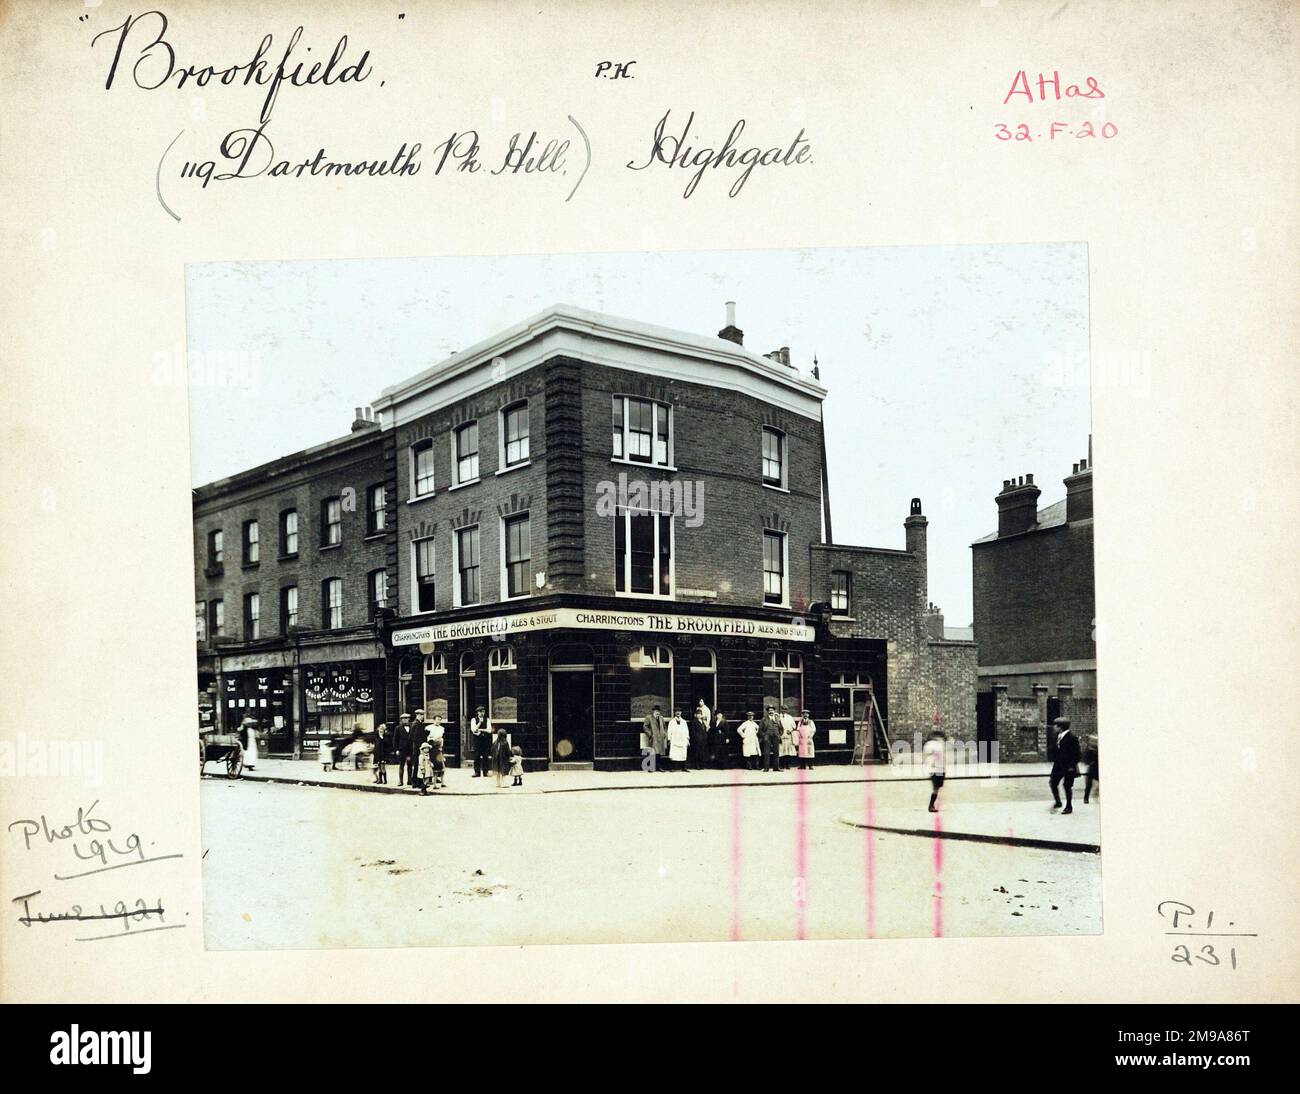 Photograph of Brookfield PH, Highgate, London. The main side of the print (shown here) depicts: Corner on view of the pub.  The back of the print (available on request) details: Trading Record 1913 . 1932 for the Brookfield, Highgate, London N19 5HU. As of July 2018 . Demolished Stock Photo